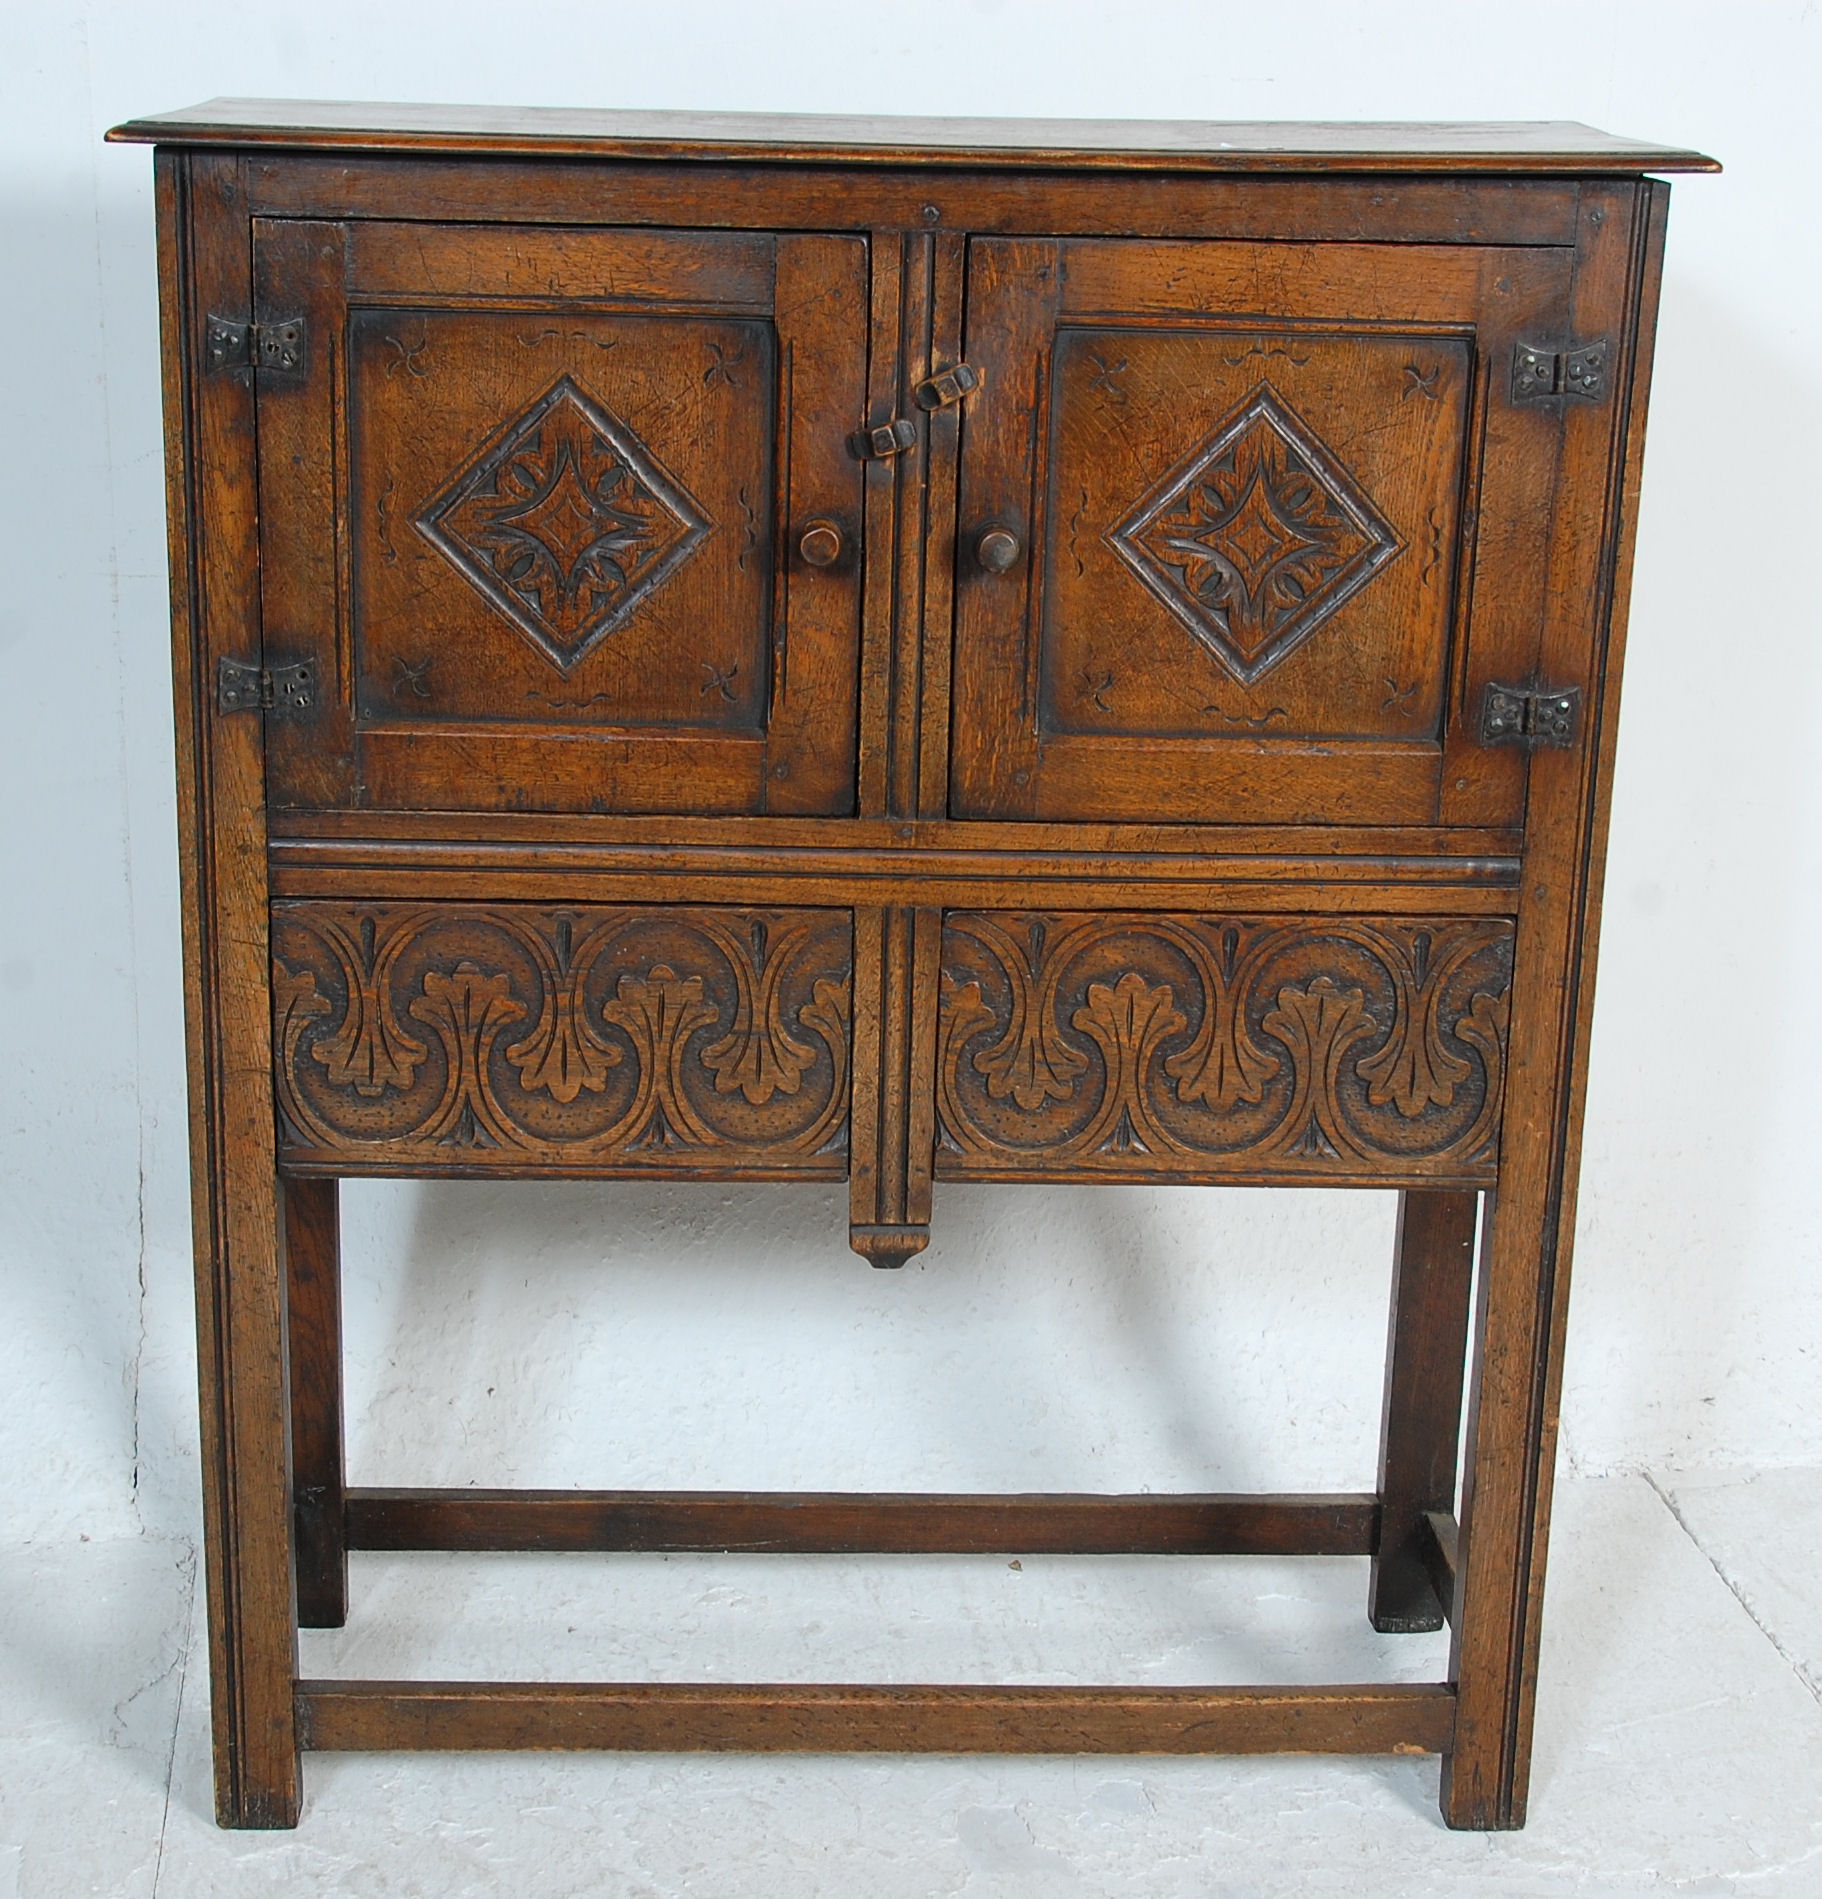 An early 20th Century 1920's carved Ipswich oak cupboard on stand having a twin door cupboard with - Image 2 of 8